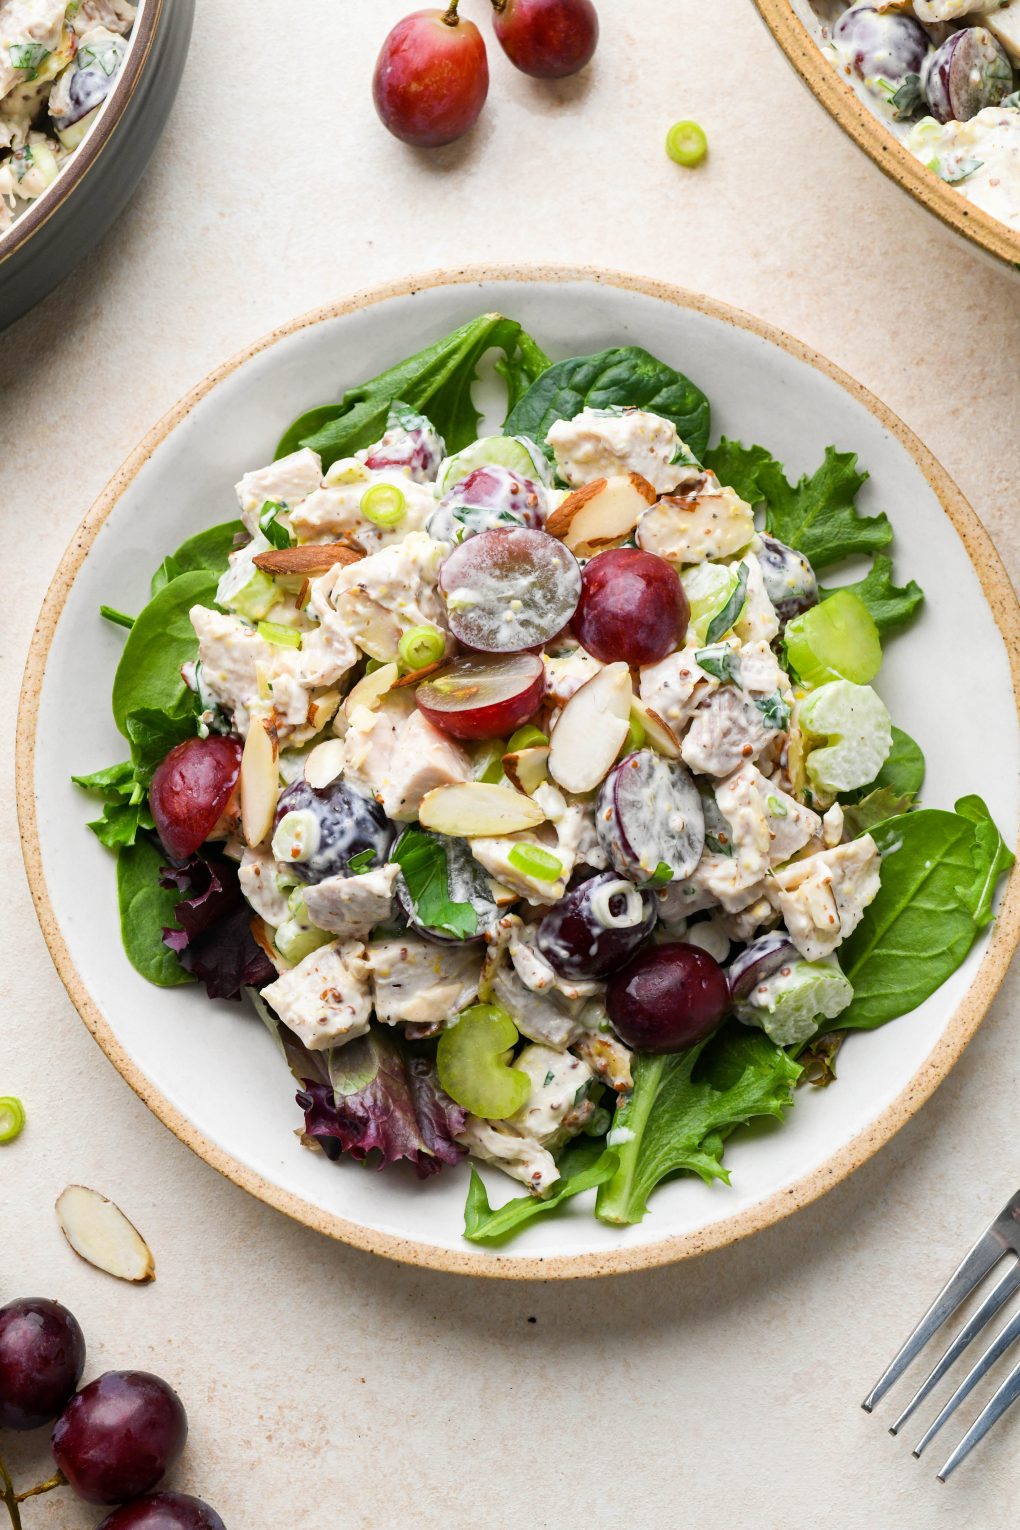 Easy Chicken Salad with Grapes and Almonds on a bed of lettuce on a light colored ceramic plate on a cream colored background.